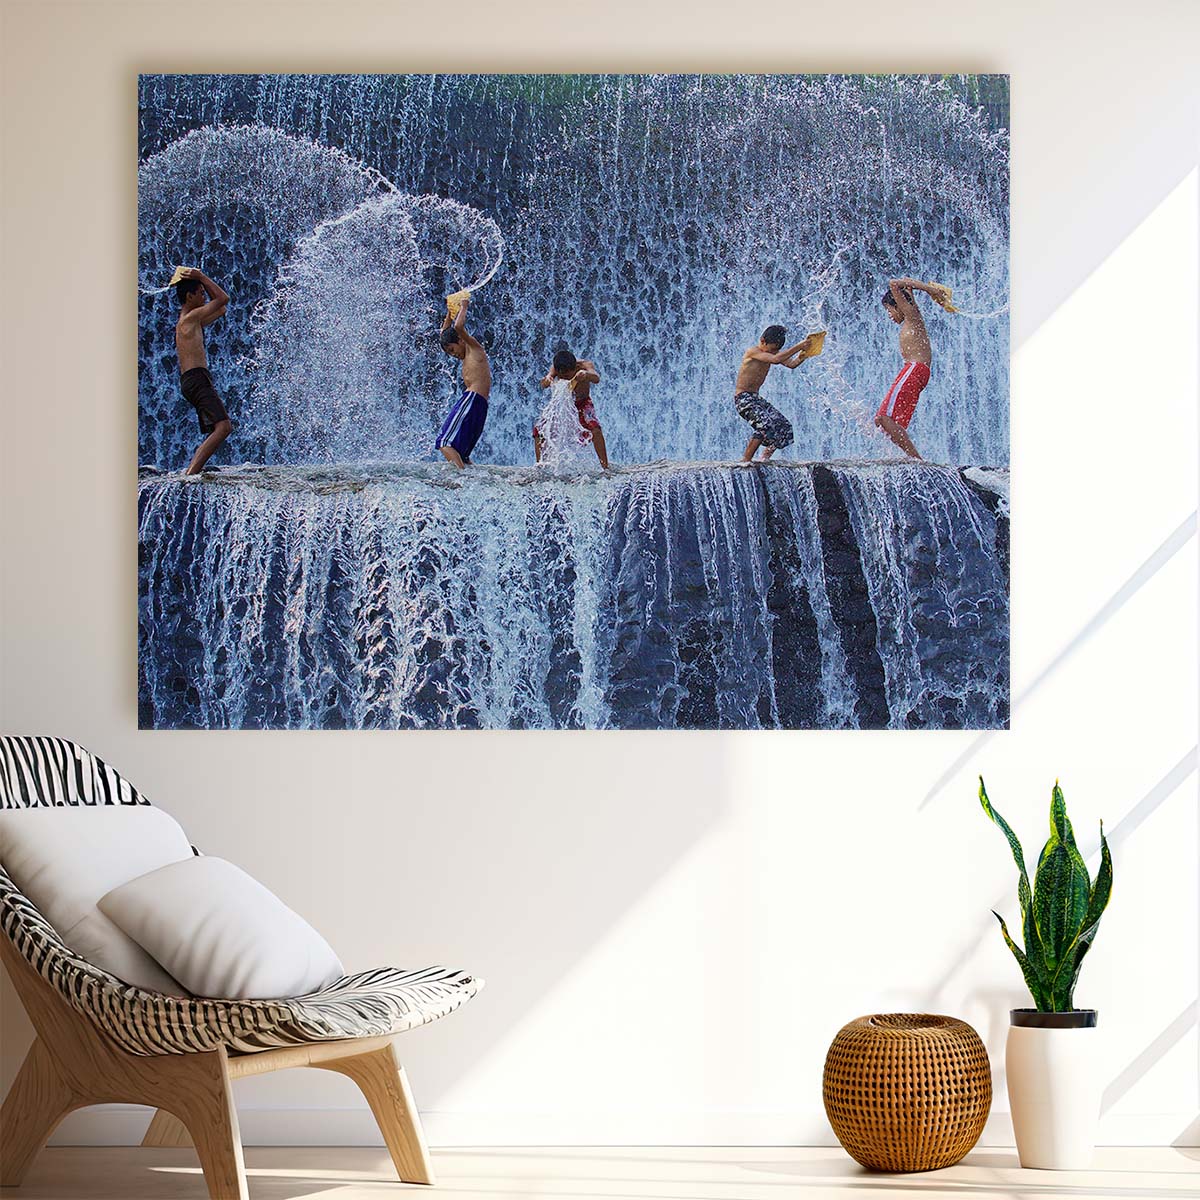 Indonesian Kids Joyful Water Play Action Wall Art by Luxuriance Designs. Made in USA.